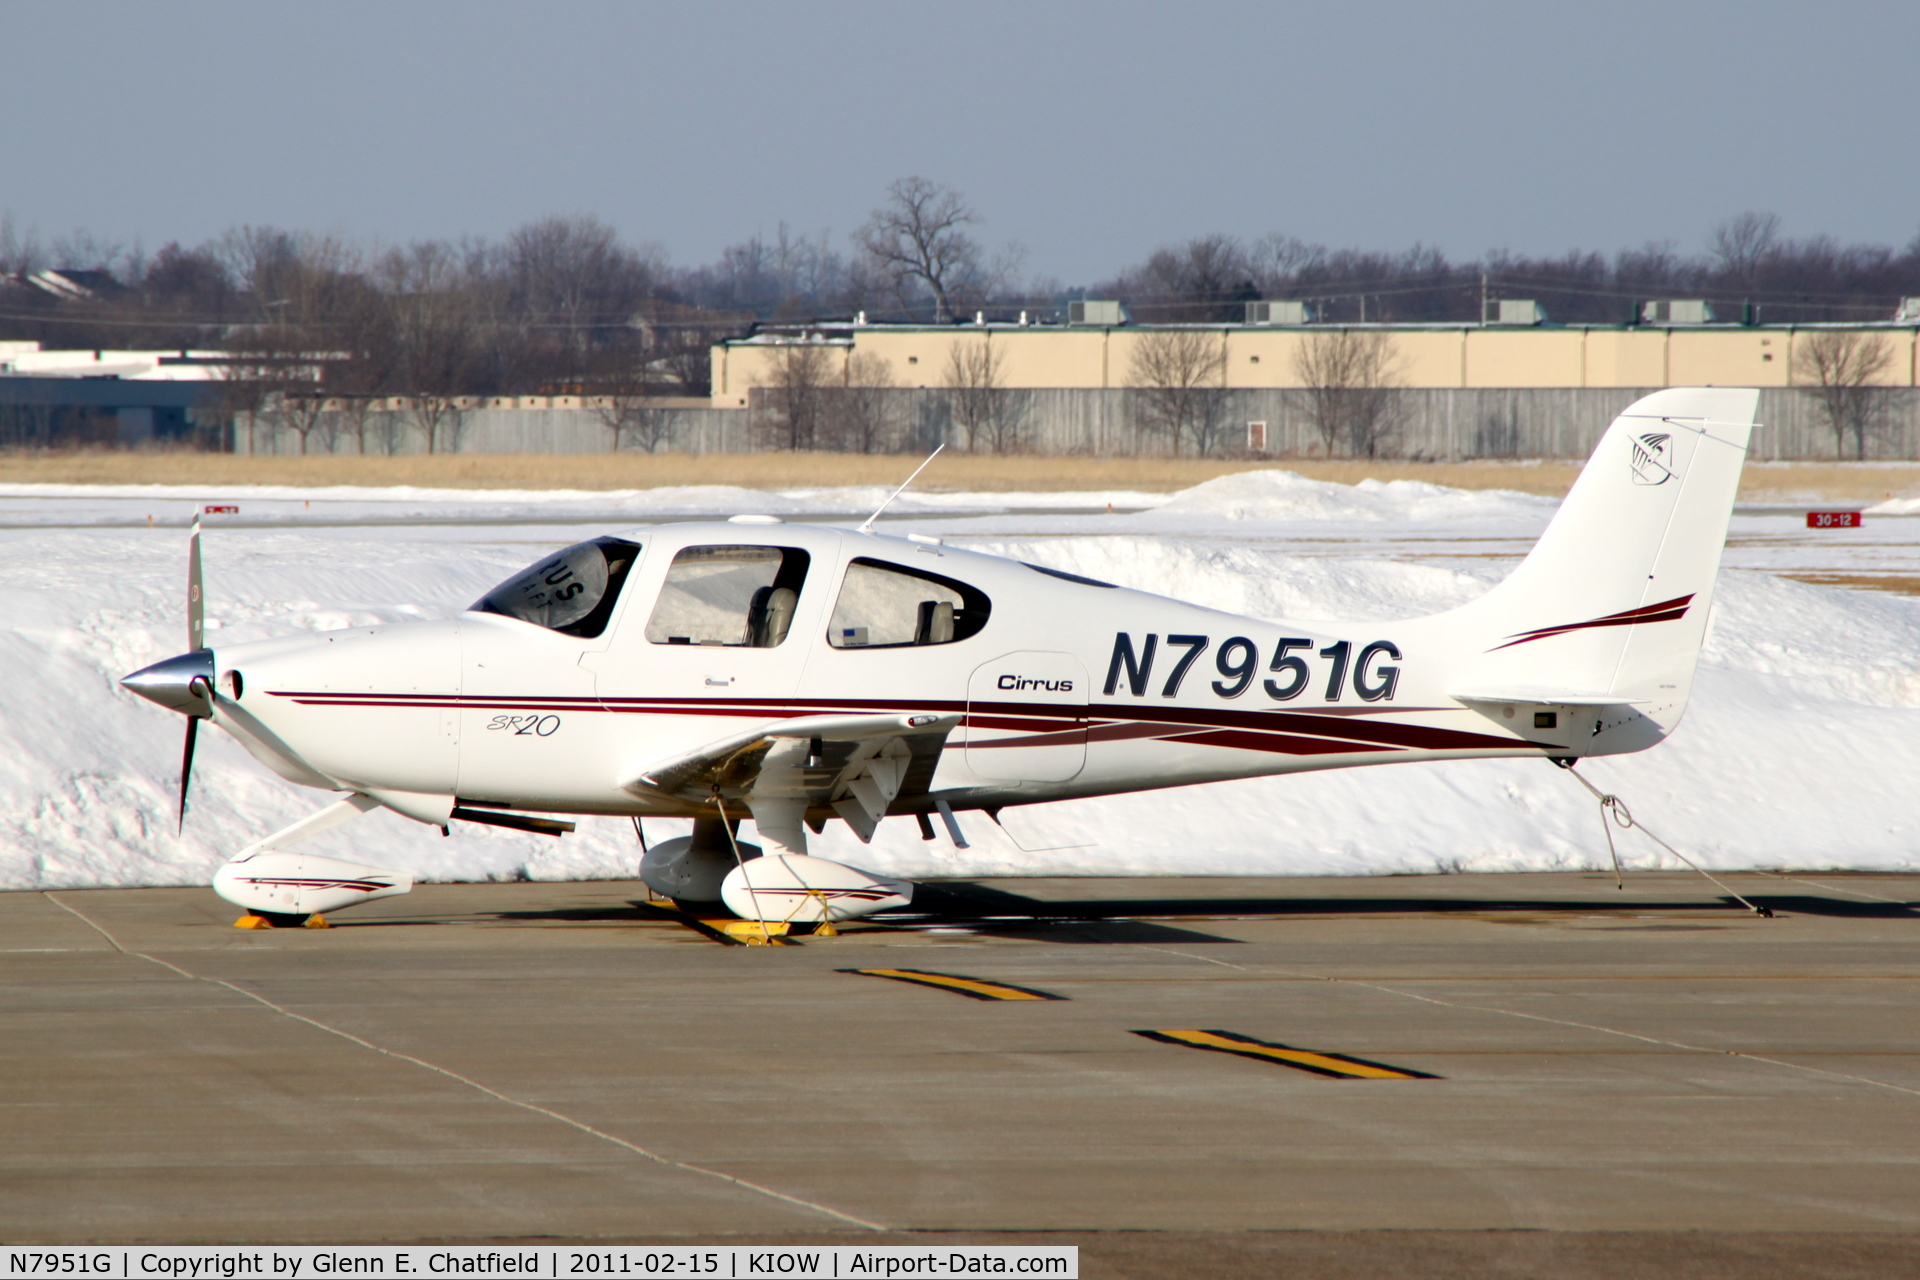 N7951G, 2001 Cirrus SR20 C/N 1158, Parked on the ramp in the morning sun